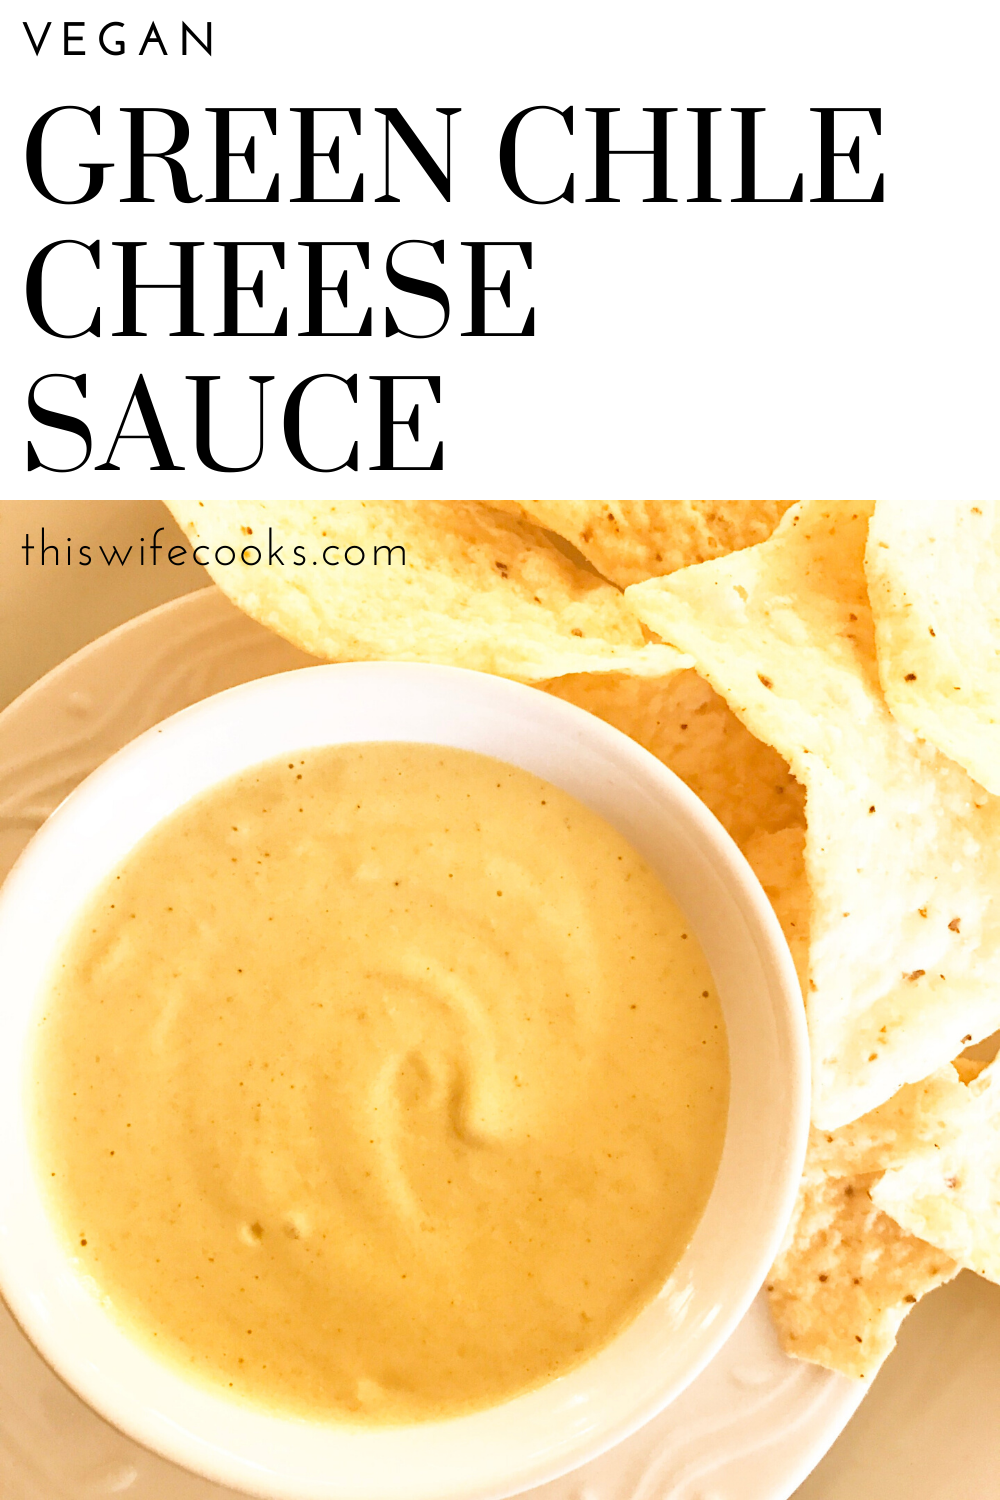 Vegan Green Chile Cheese Sauce - Every vegan home cook needs a solid cheese sauce that they can use for everything from nachos to burgers to pasta to dips. This is that sauce. via @thiswifecooks